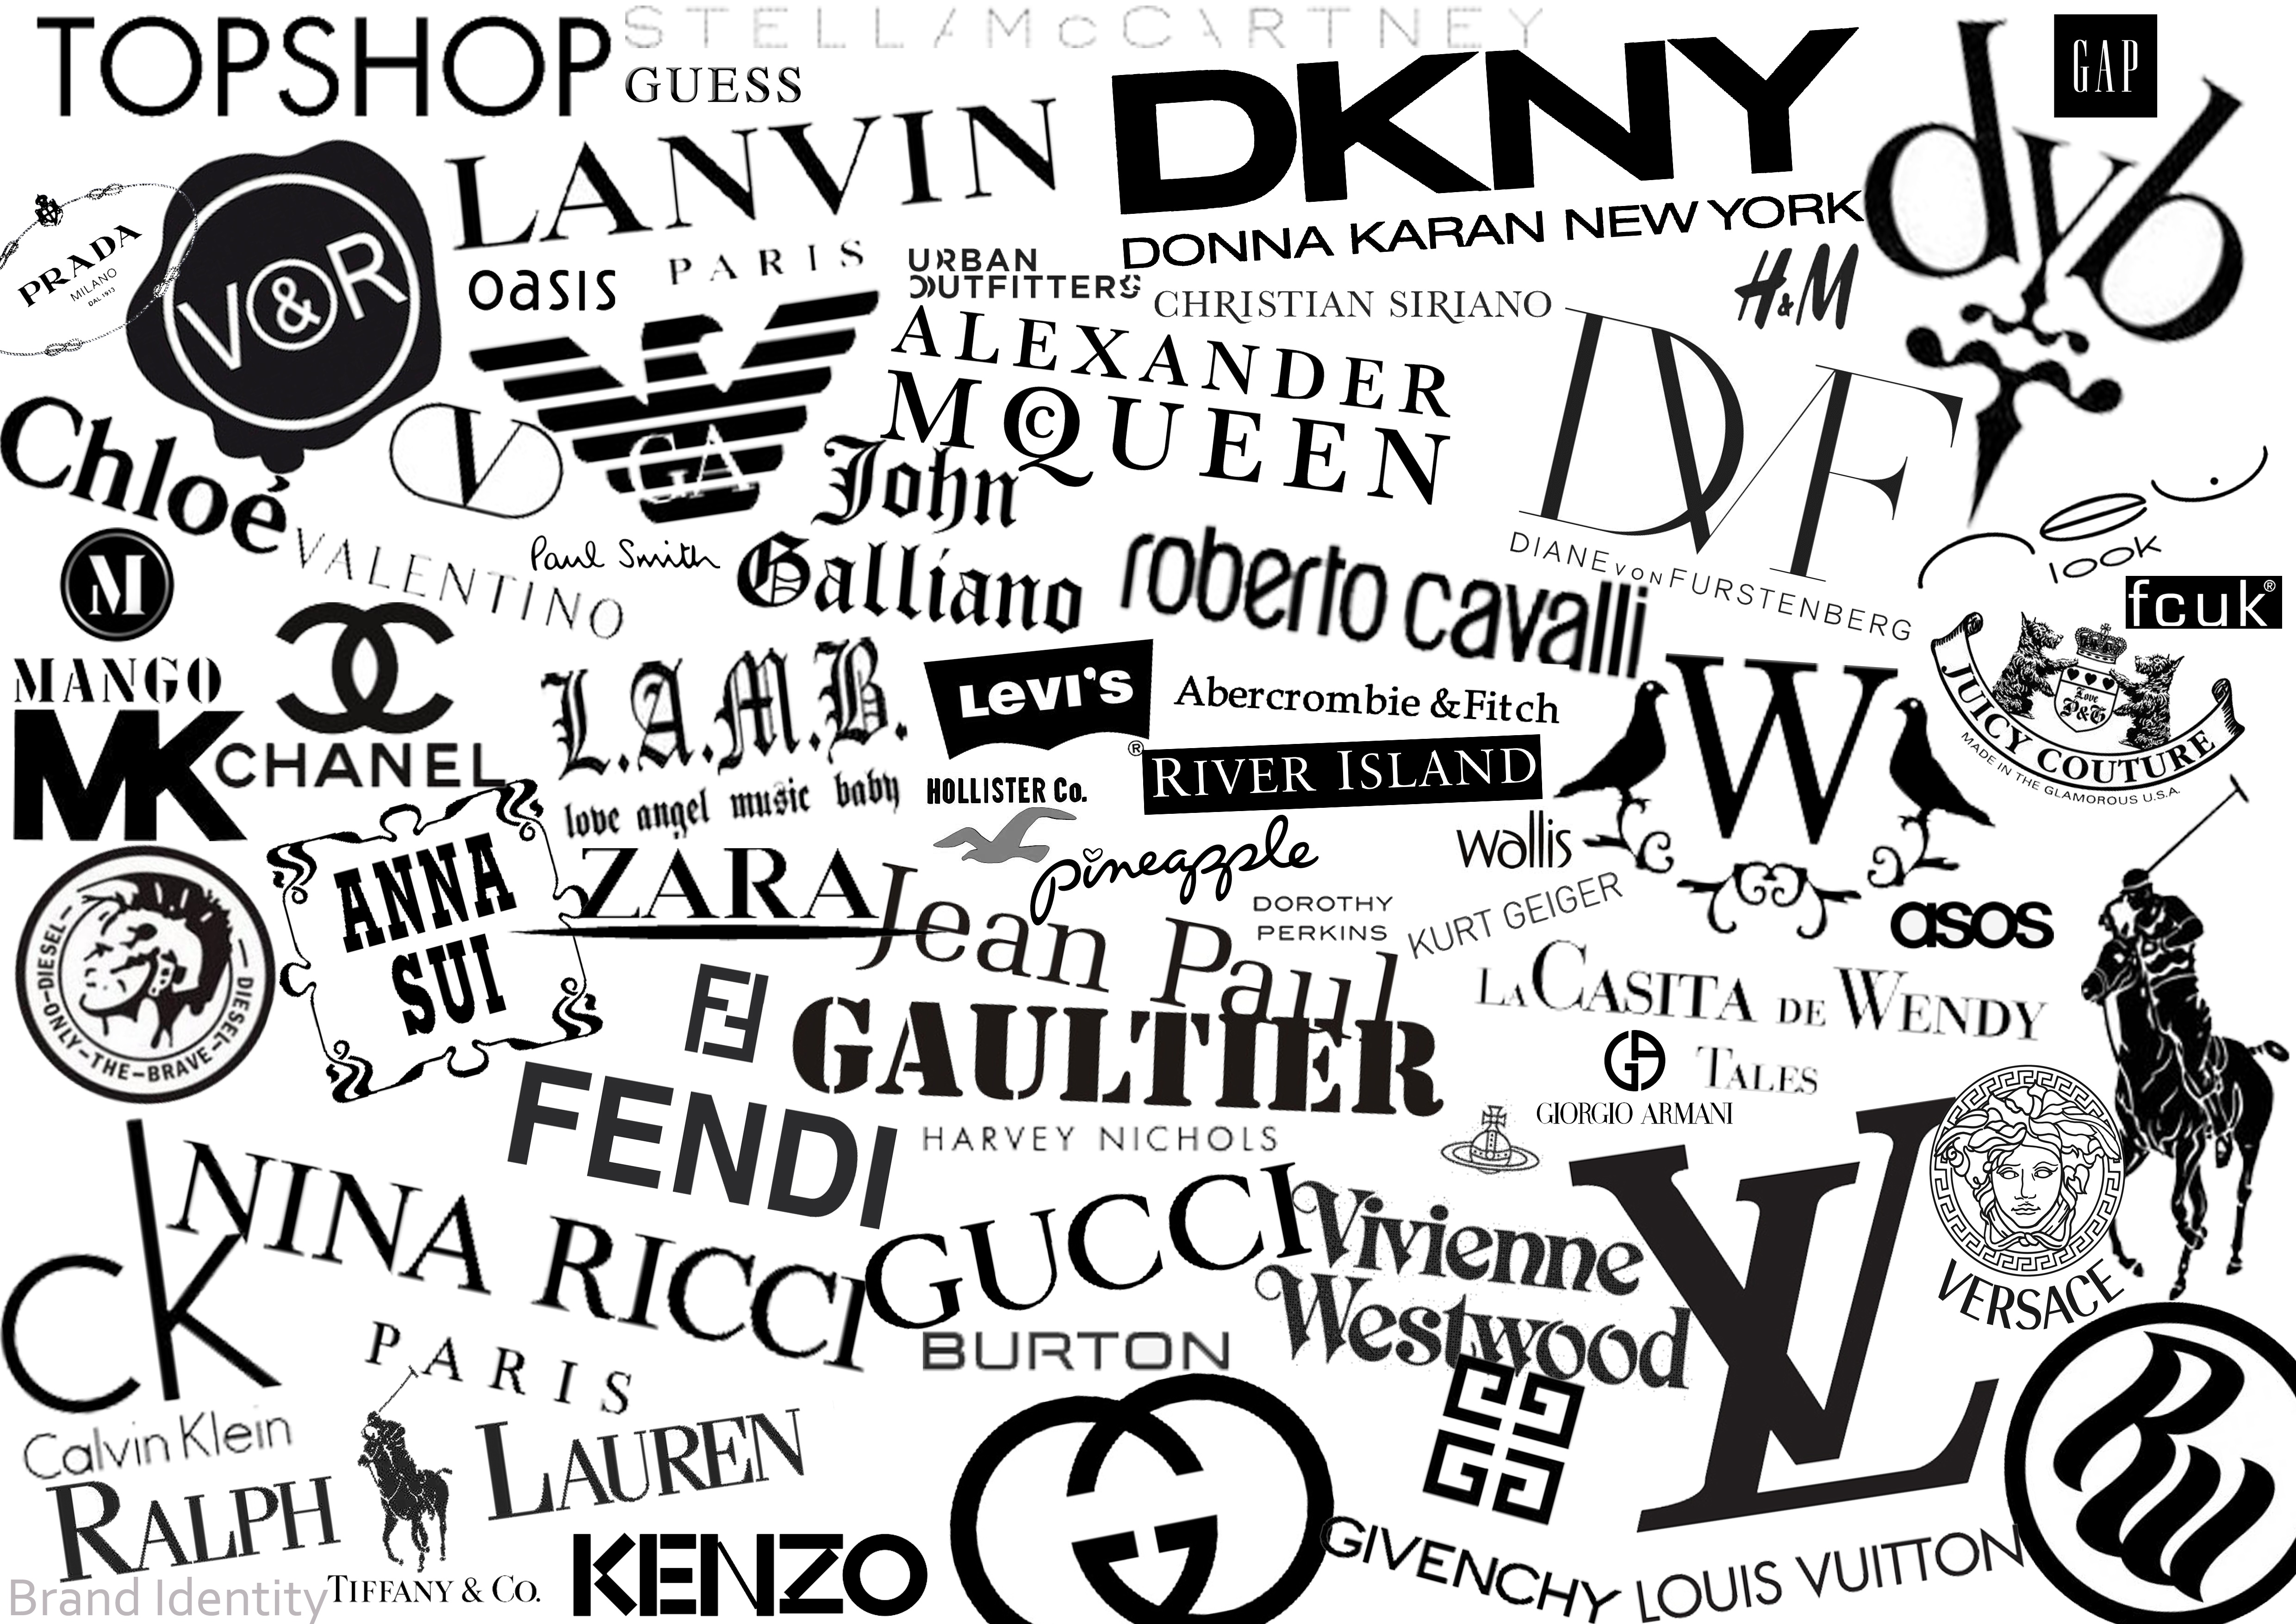 The 10 Most Valuable Fashion Brands of 2014 OZONWeb by OZON Magazine